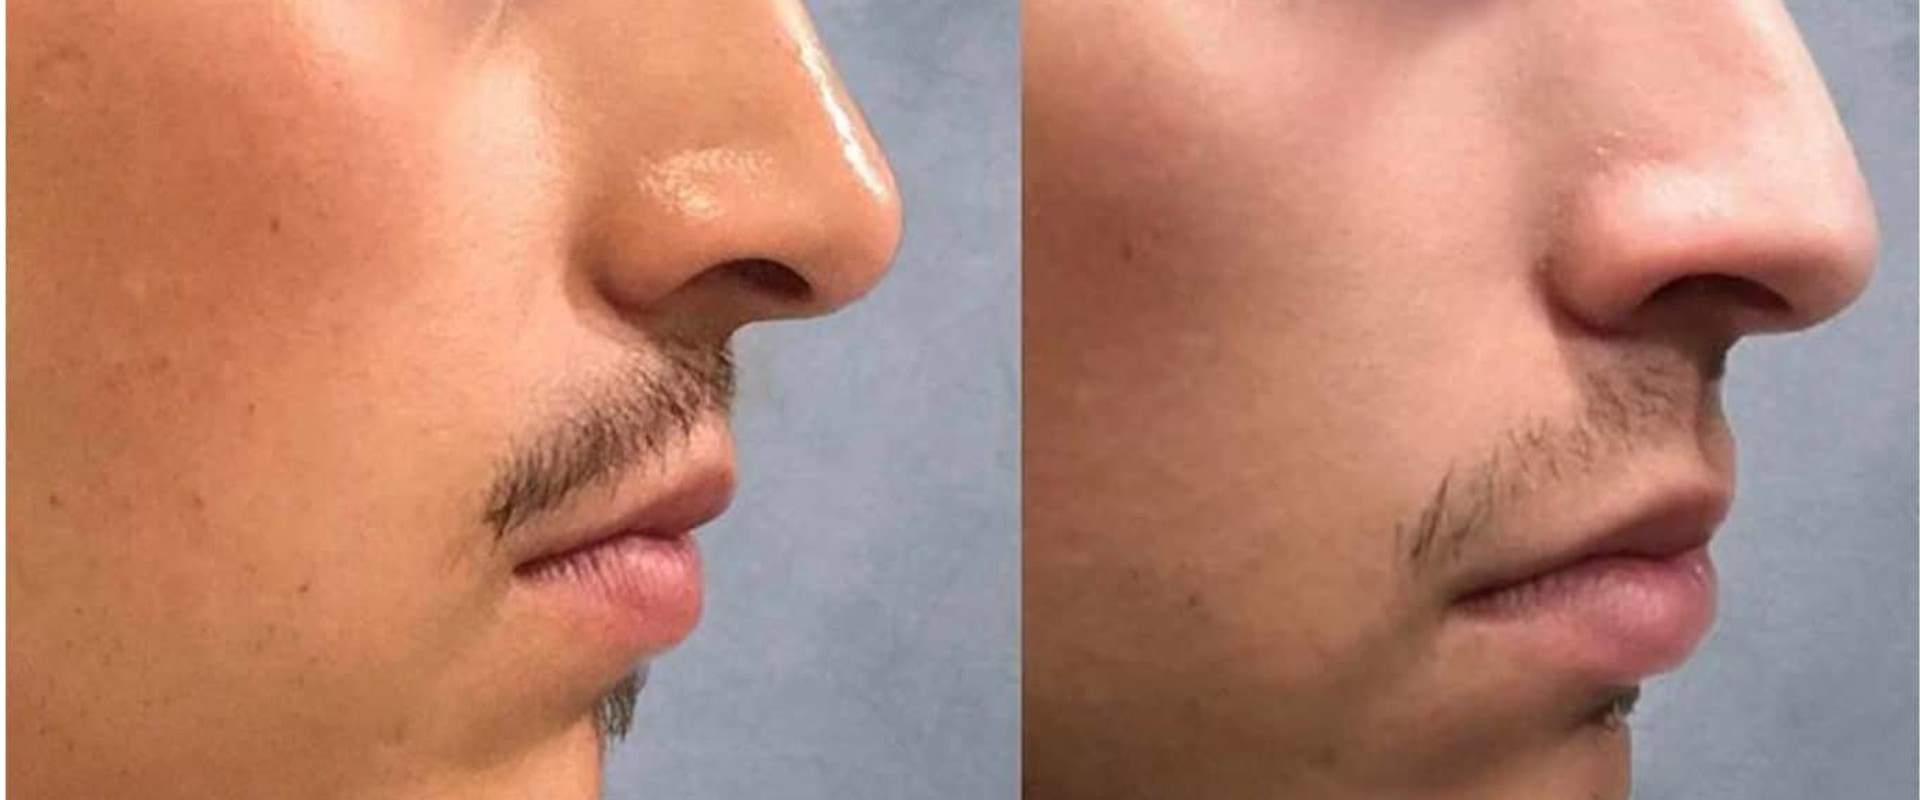 How long do fillers last?